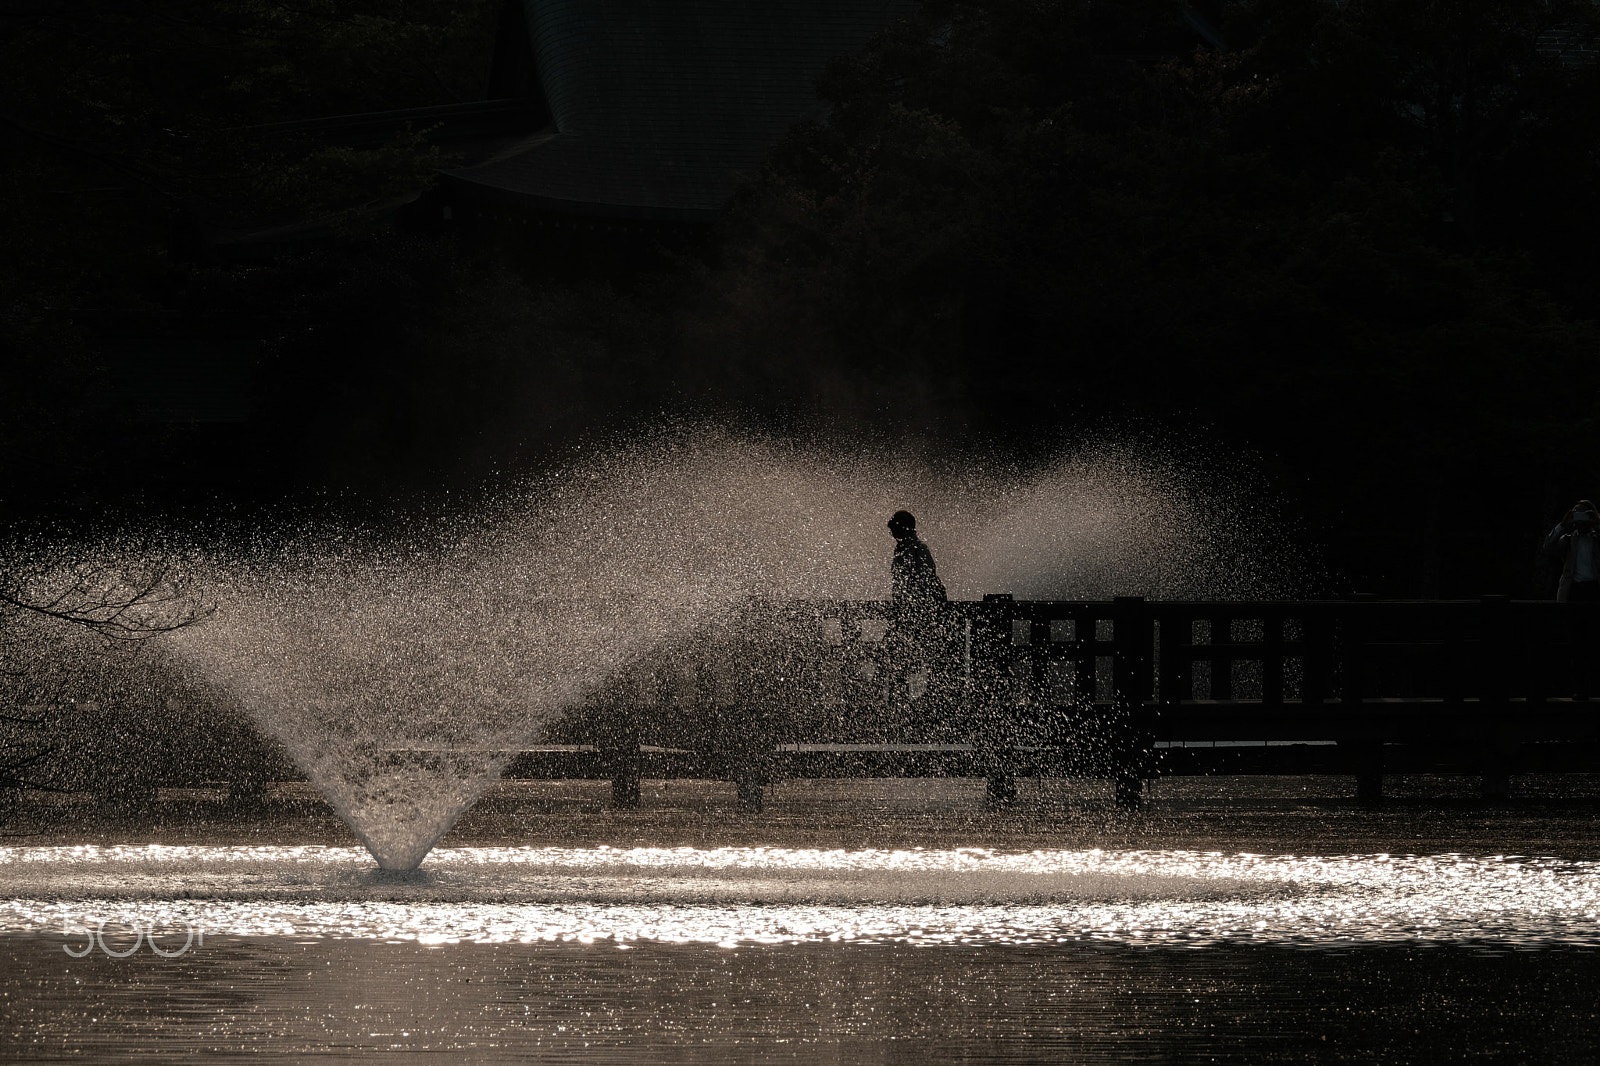 Fujifilm X-Pro2 + XF100-400mmF4.5-5.6 R LM OIS WR + 1.4x sample photo. Between the fountain photography